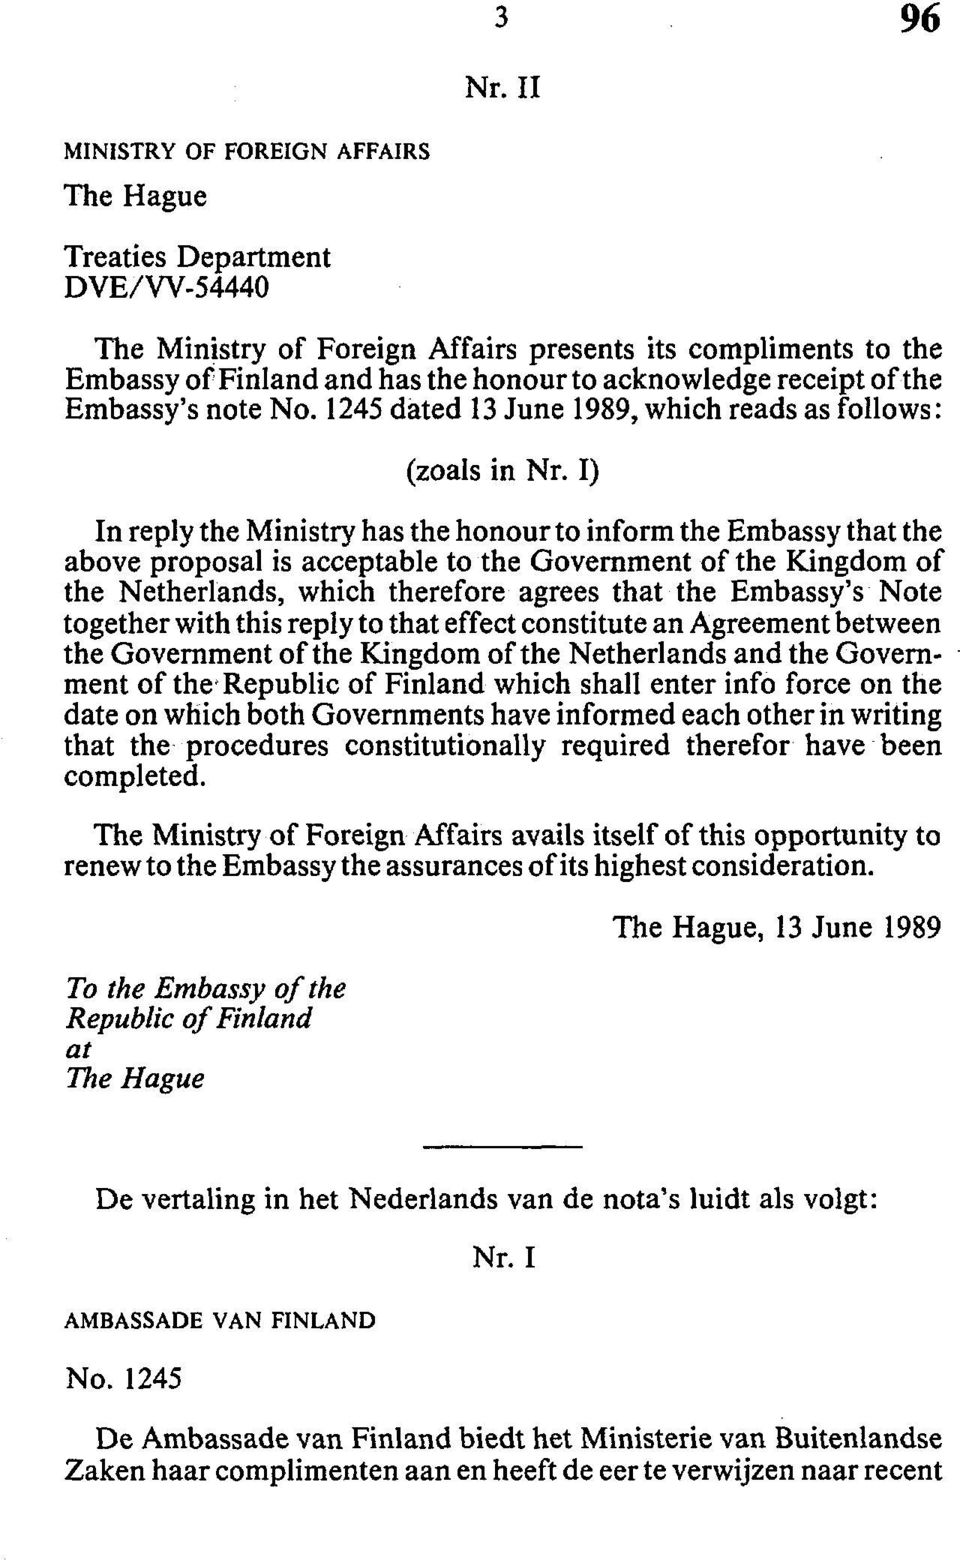 I) In reply the Ministry has the honour to inform the Embassy that the above proposal is acceptable to the Government of the Kingdom of the Netherlands, which therefore agrees that the Embassy's Note